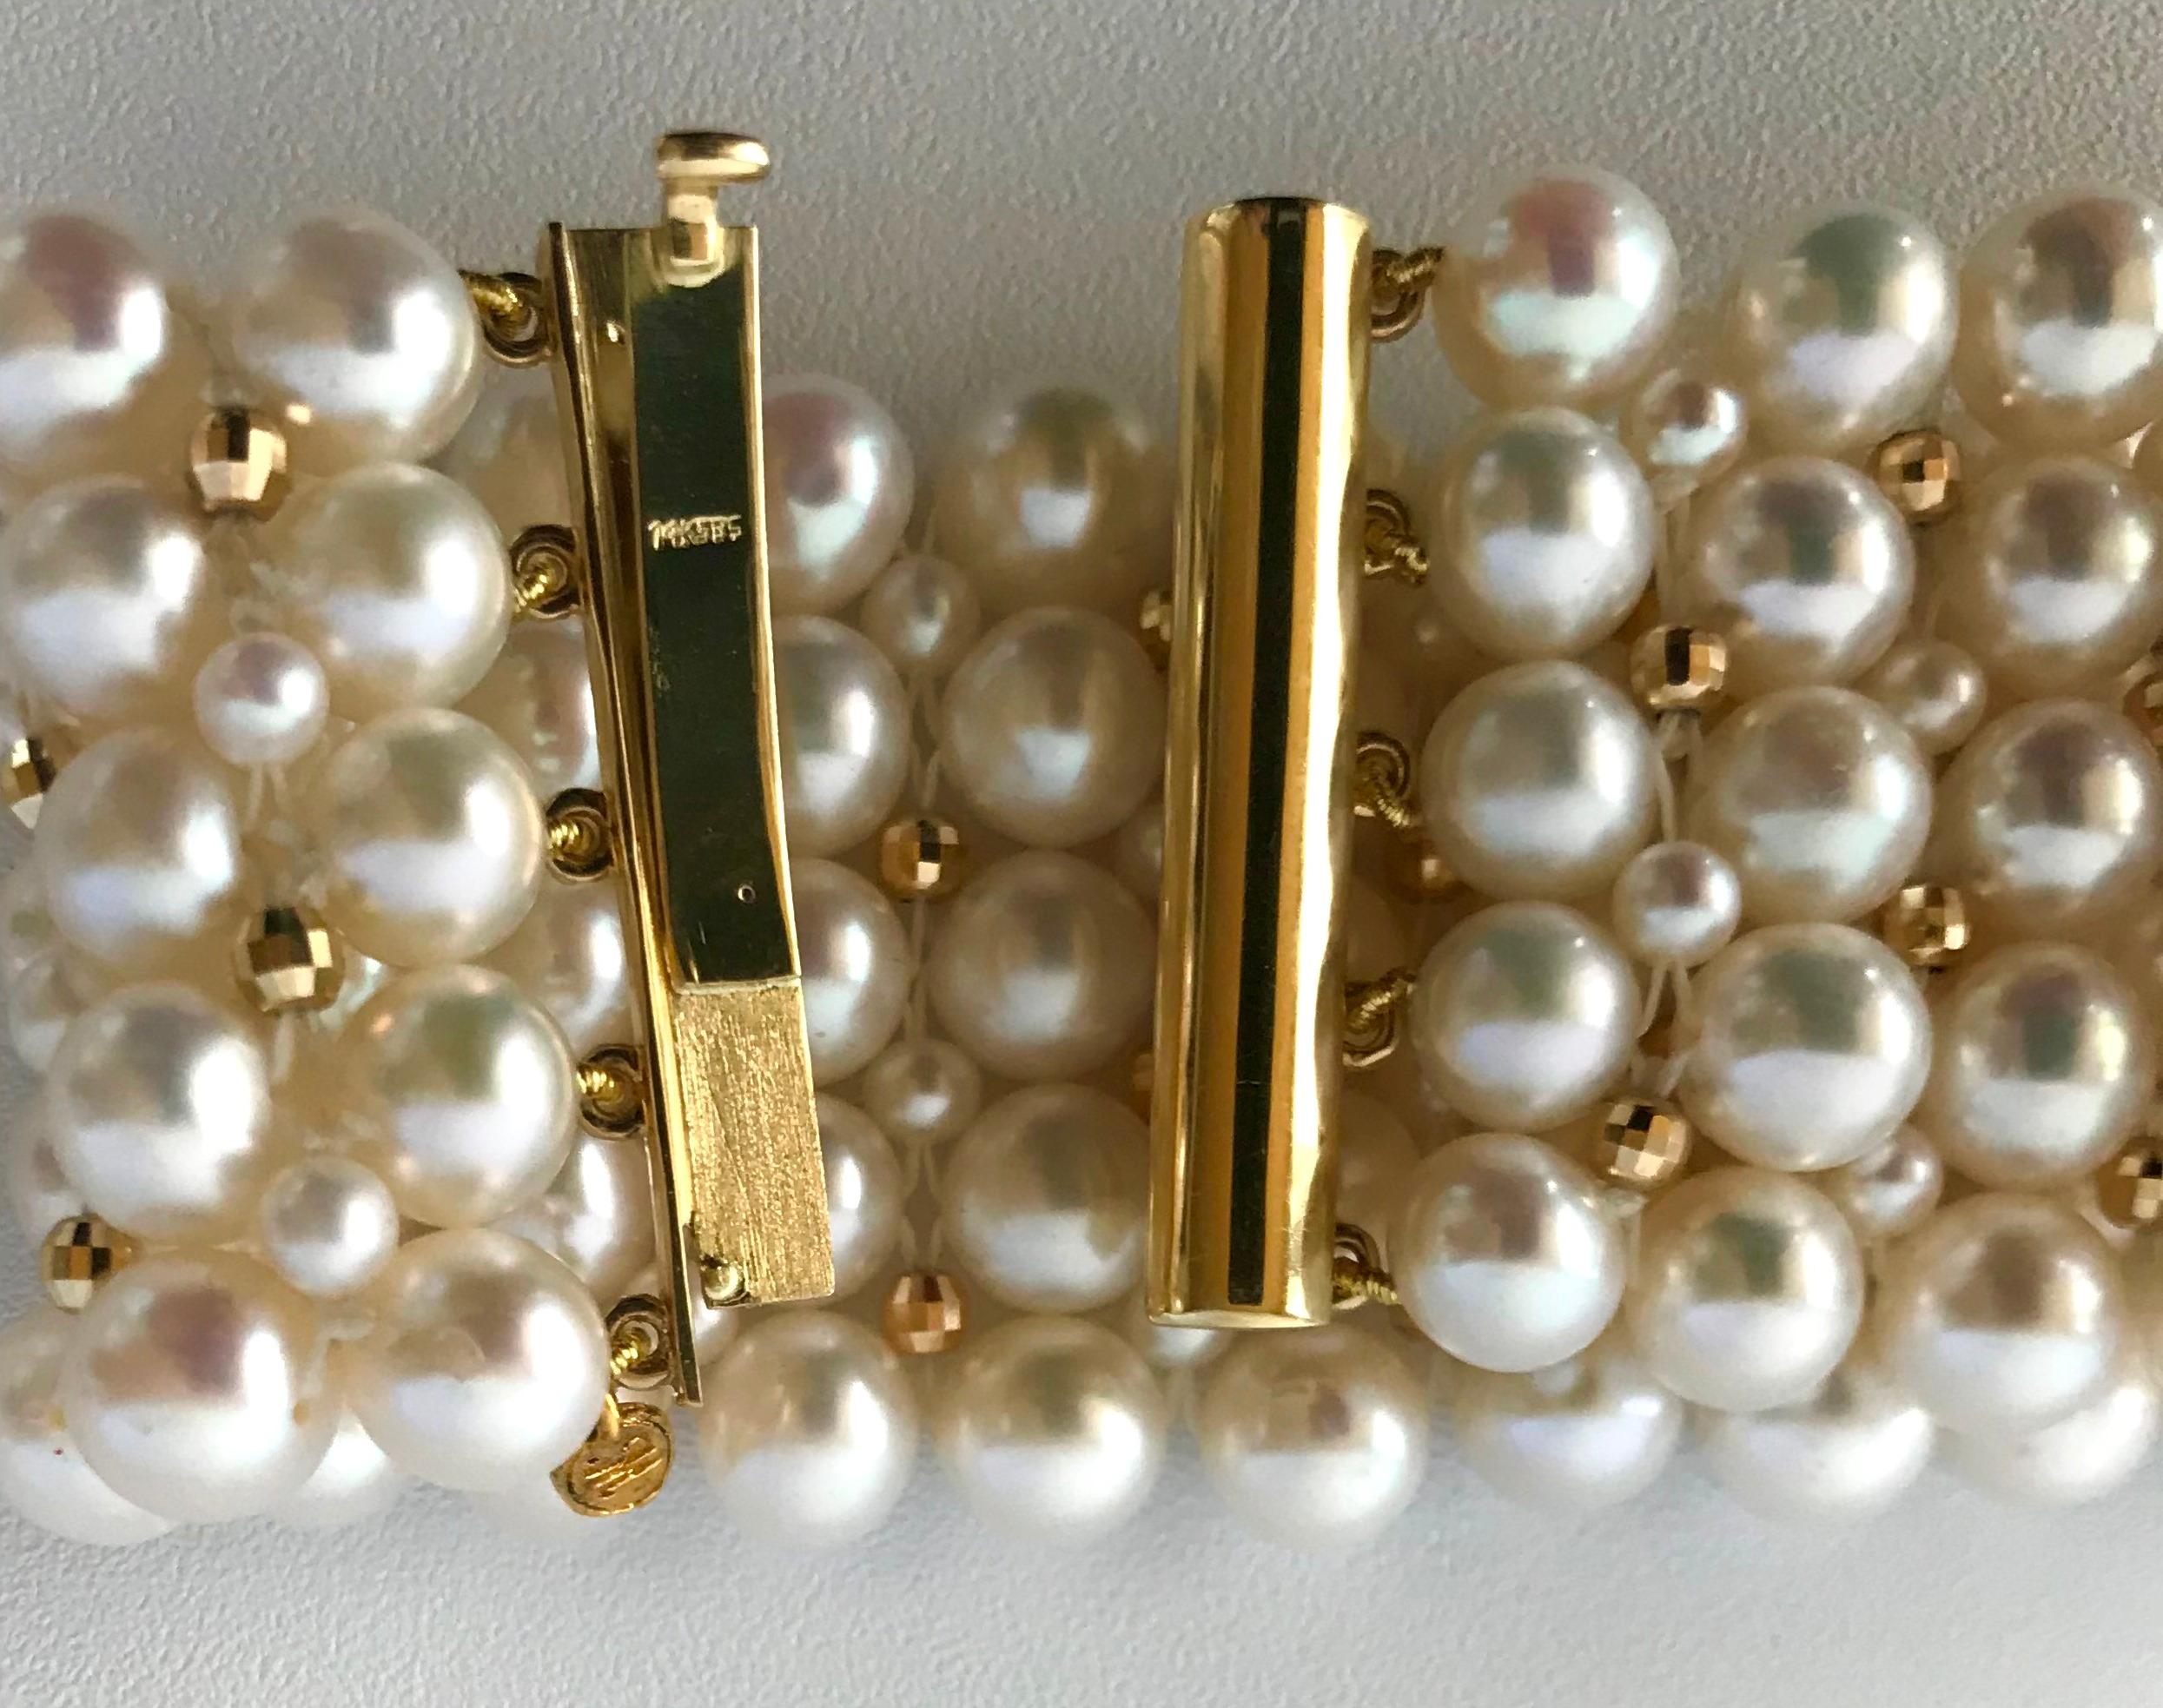 Marina J Stunning Woven Pearl Bracelet with 14 Karat Yellow Gold Beads and Clasp For Sale 5